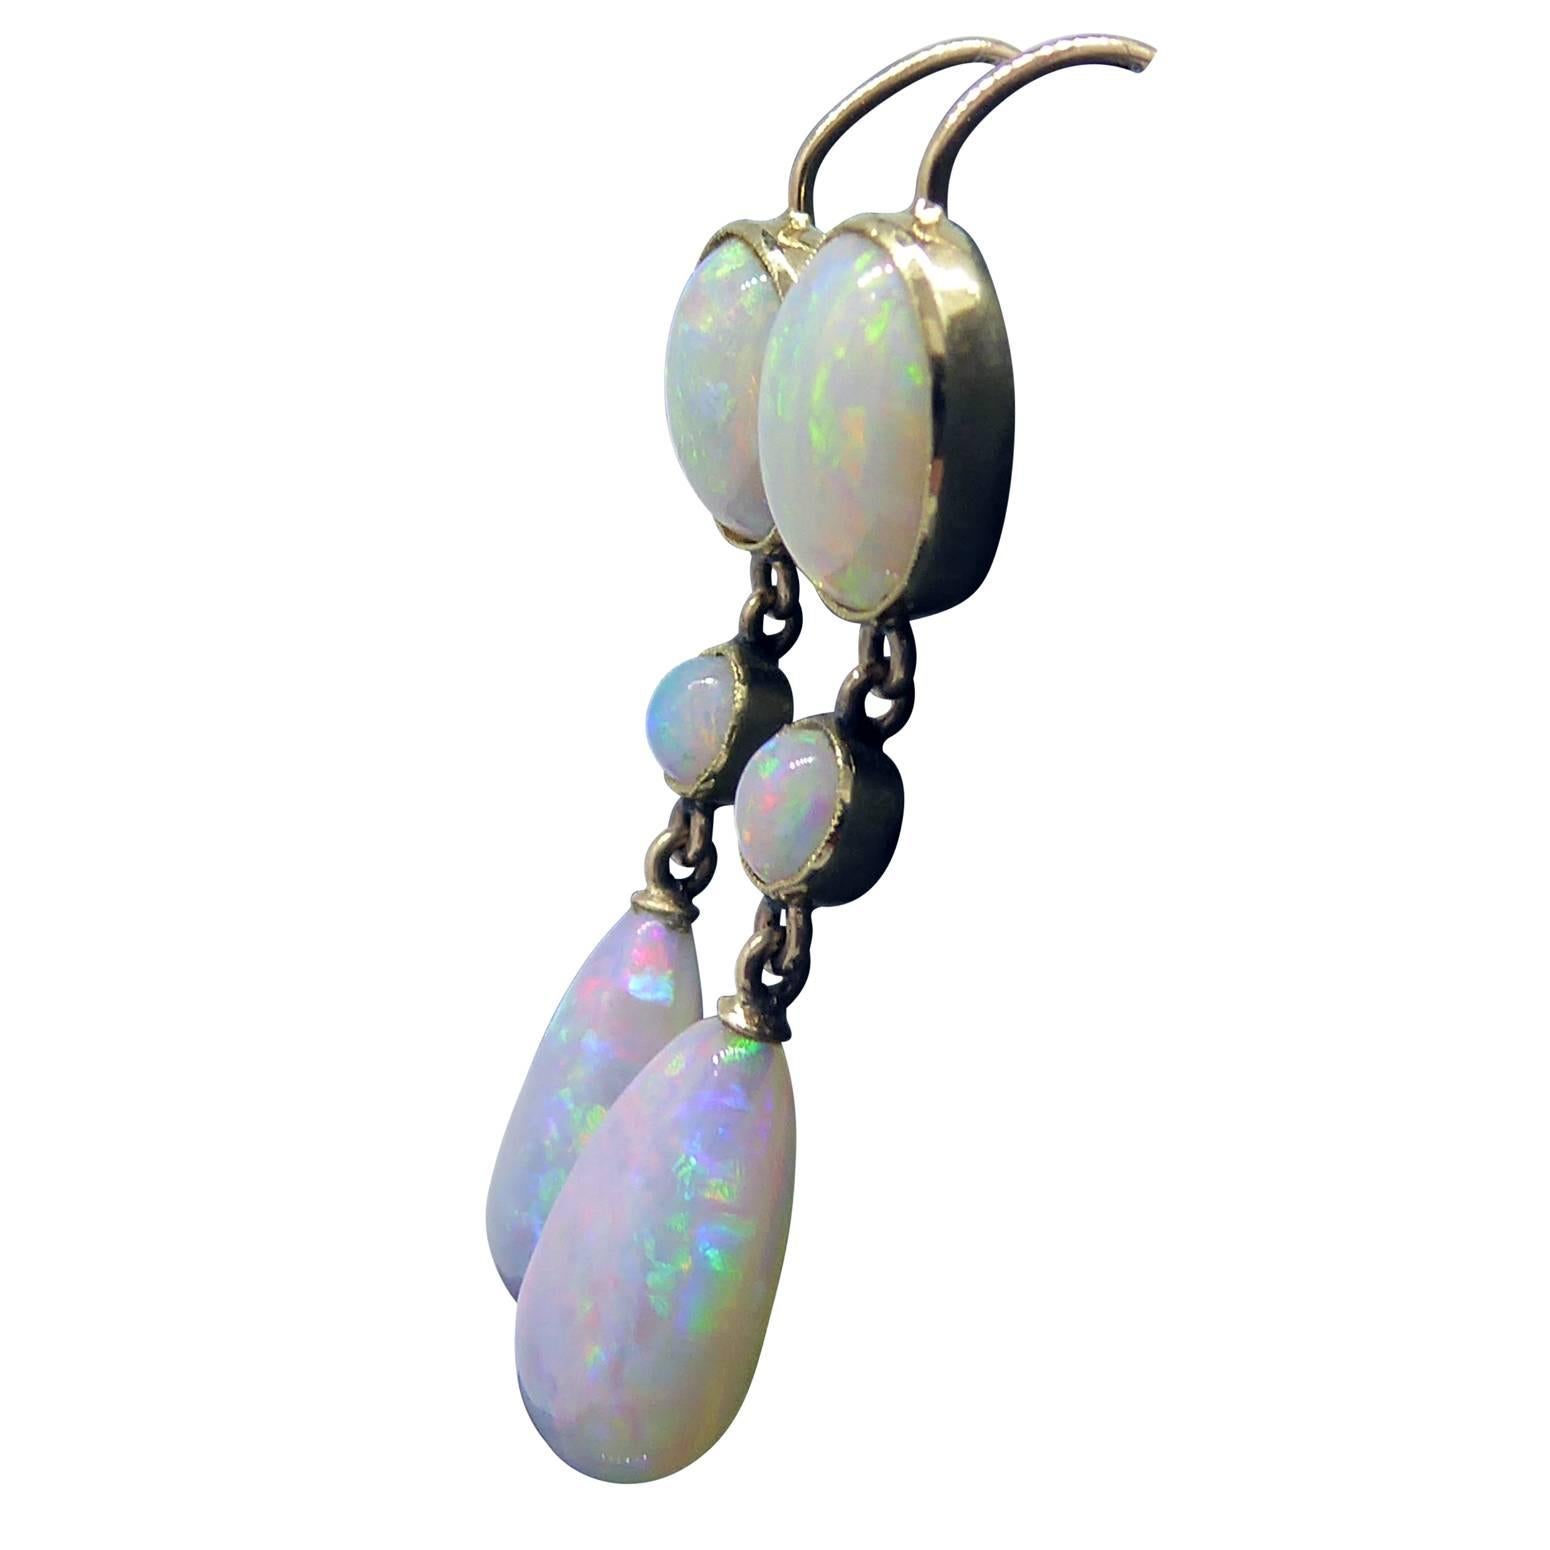 Absolutely delicious drop earrings featuring a tear-drop shaped opal suspended from round and oval cabochon cut opals.  The colours of blue/green and orange flash sensationally, a stunning display which is amplified as the earring sway with each